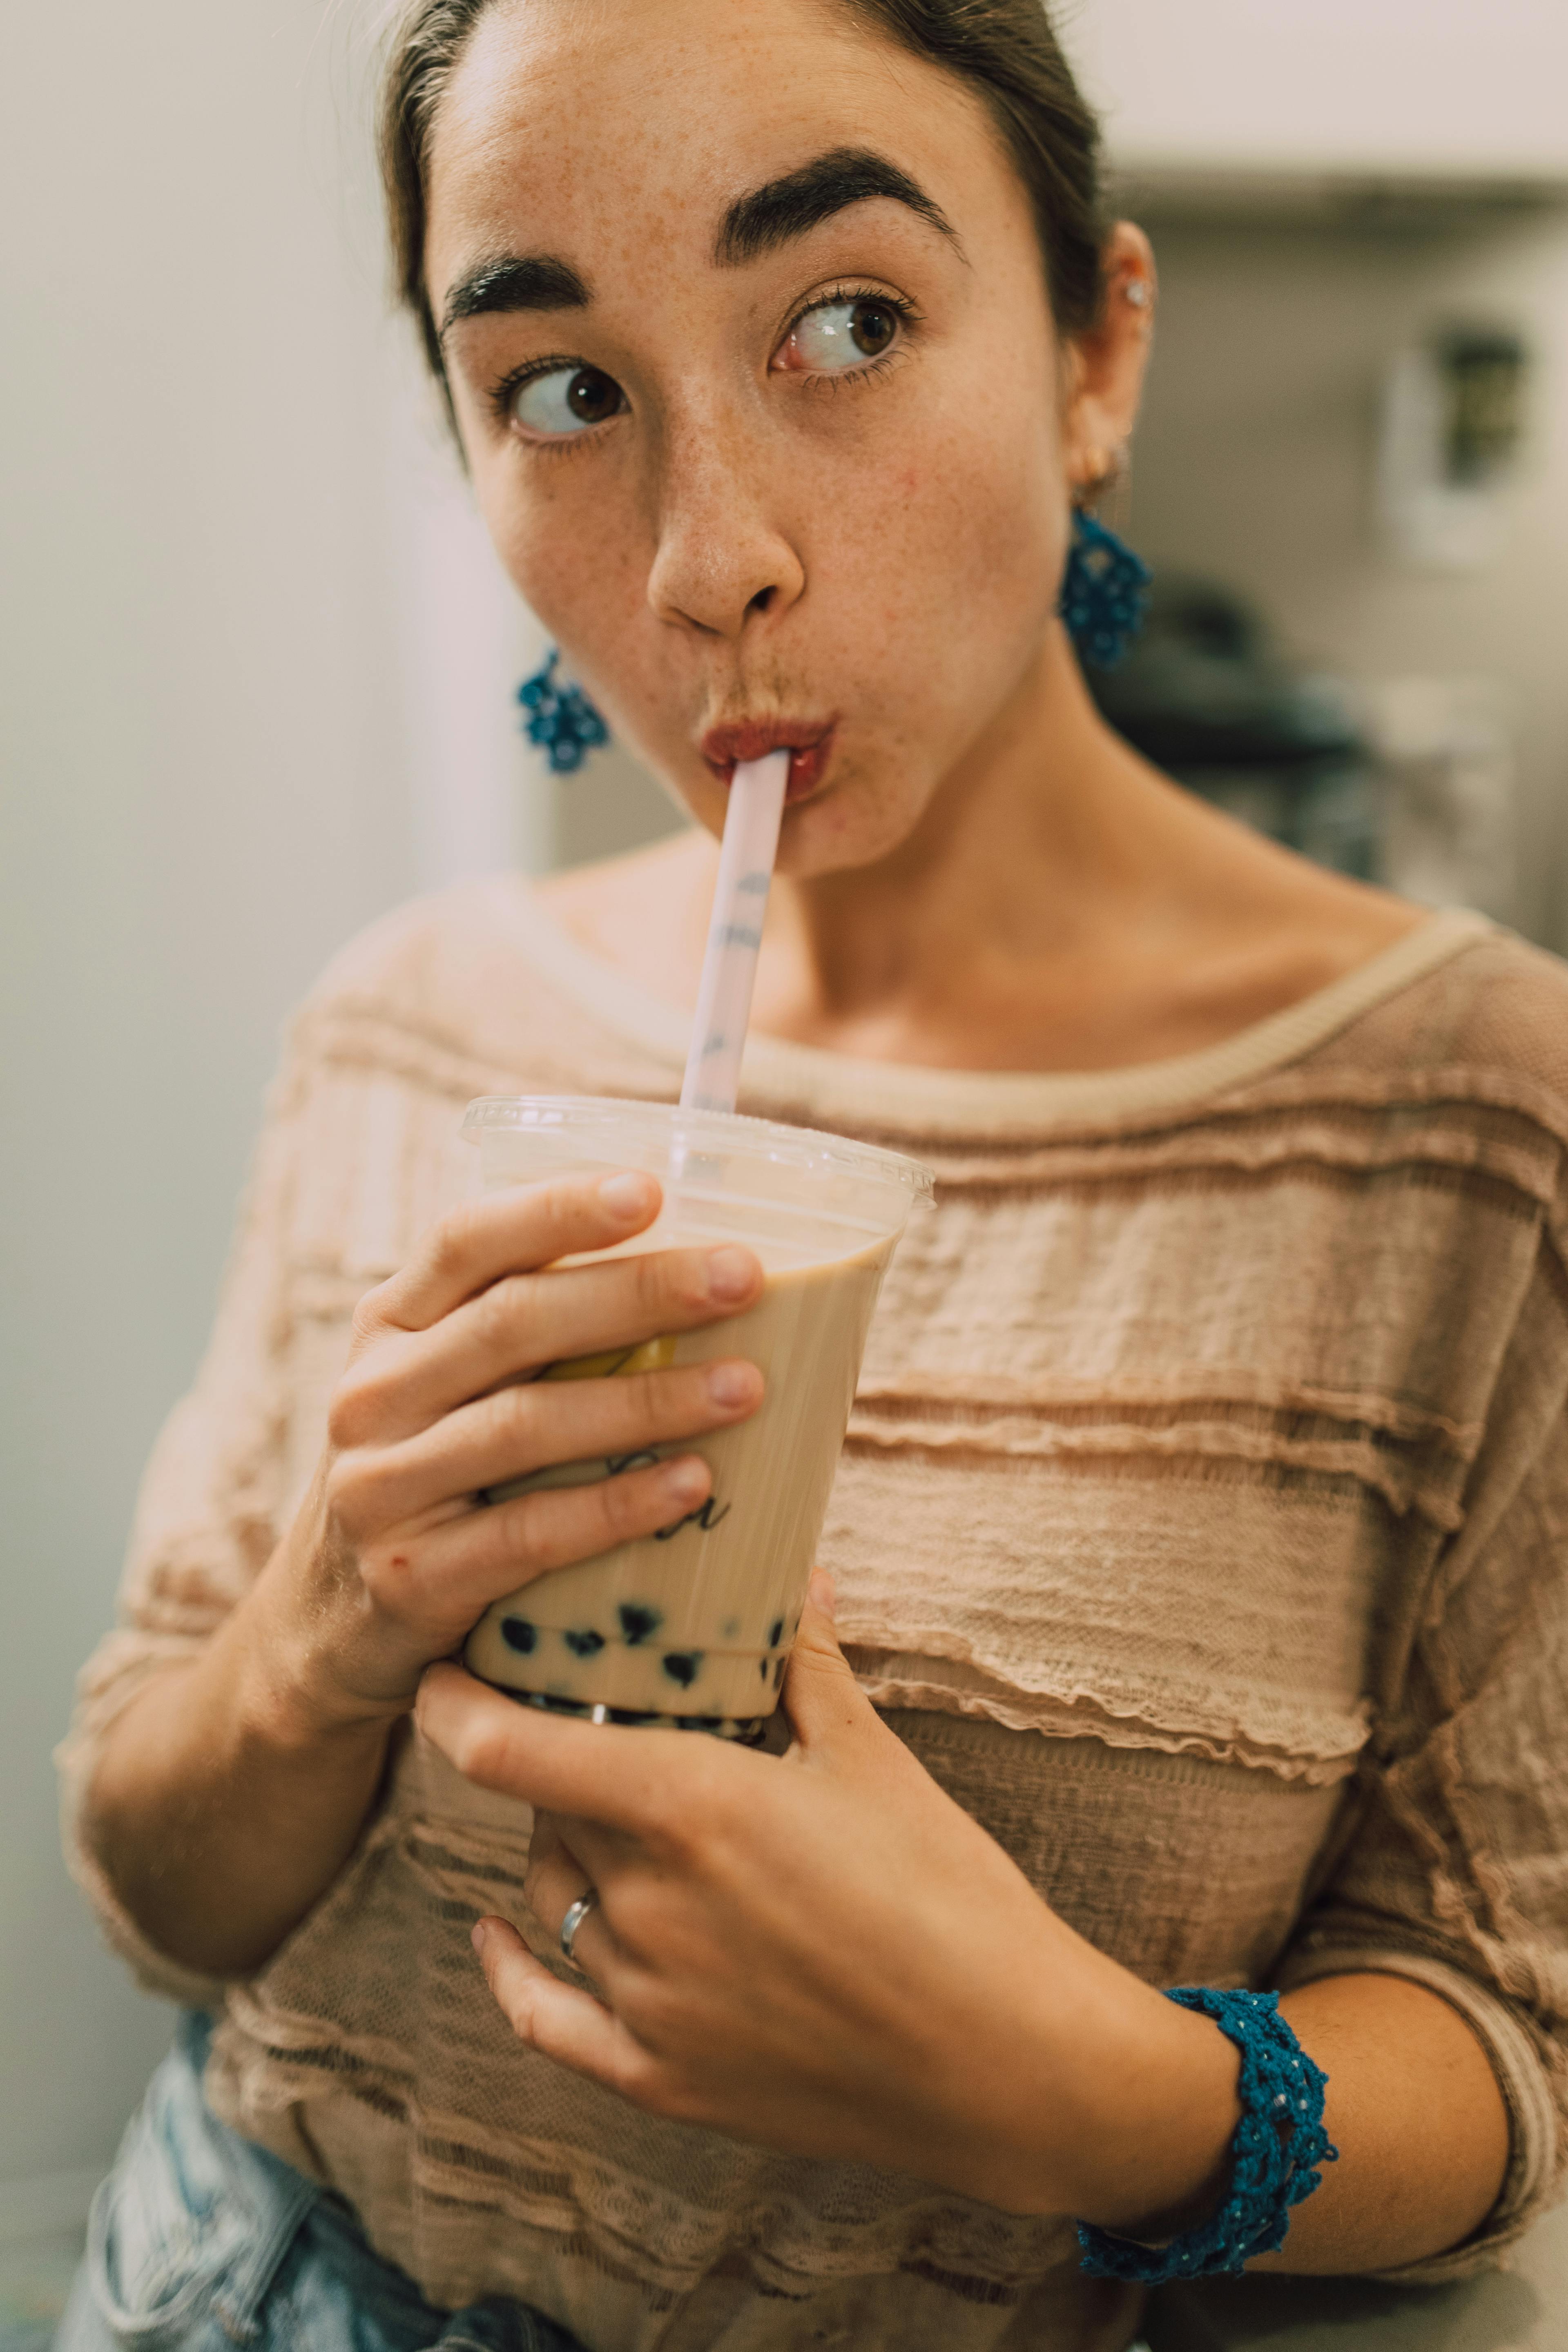 Bubble Tea on Glass Cup · Free Stock Photo